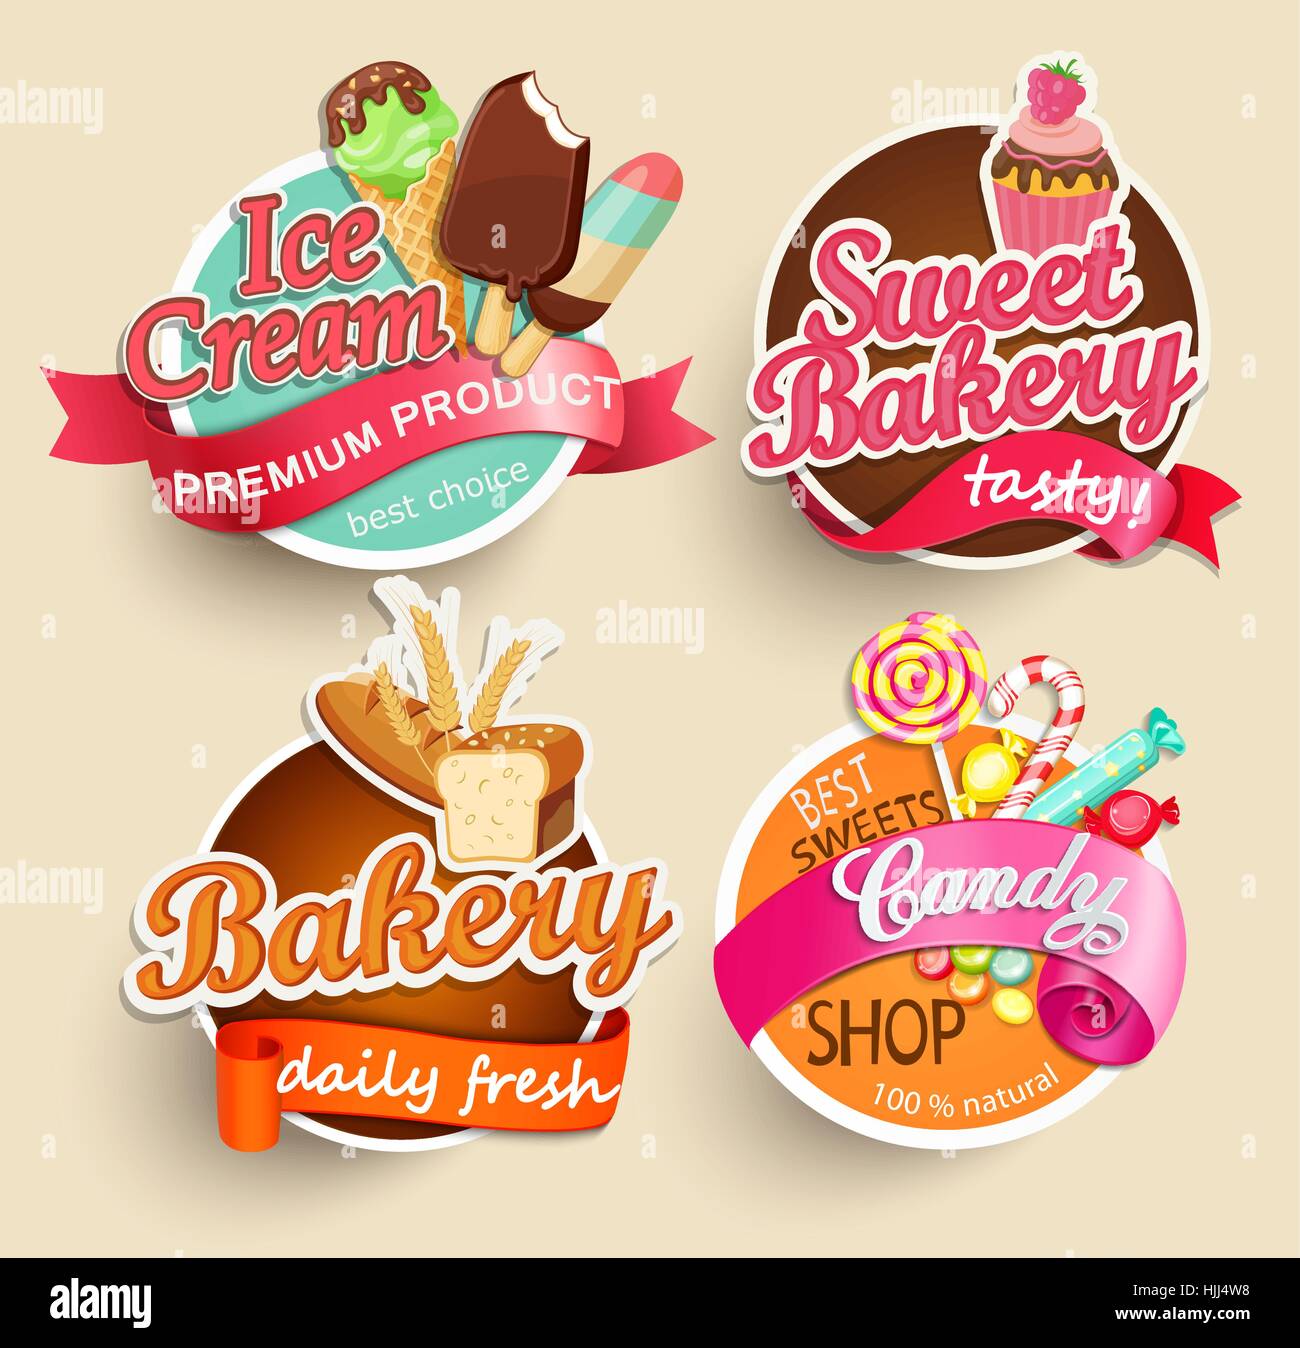 Food Label or Sticker - bakery, ice cream, candy, sweet bakery - Design Template. Vector illustration. Stock Vector